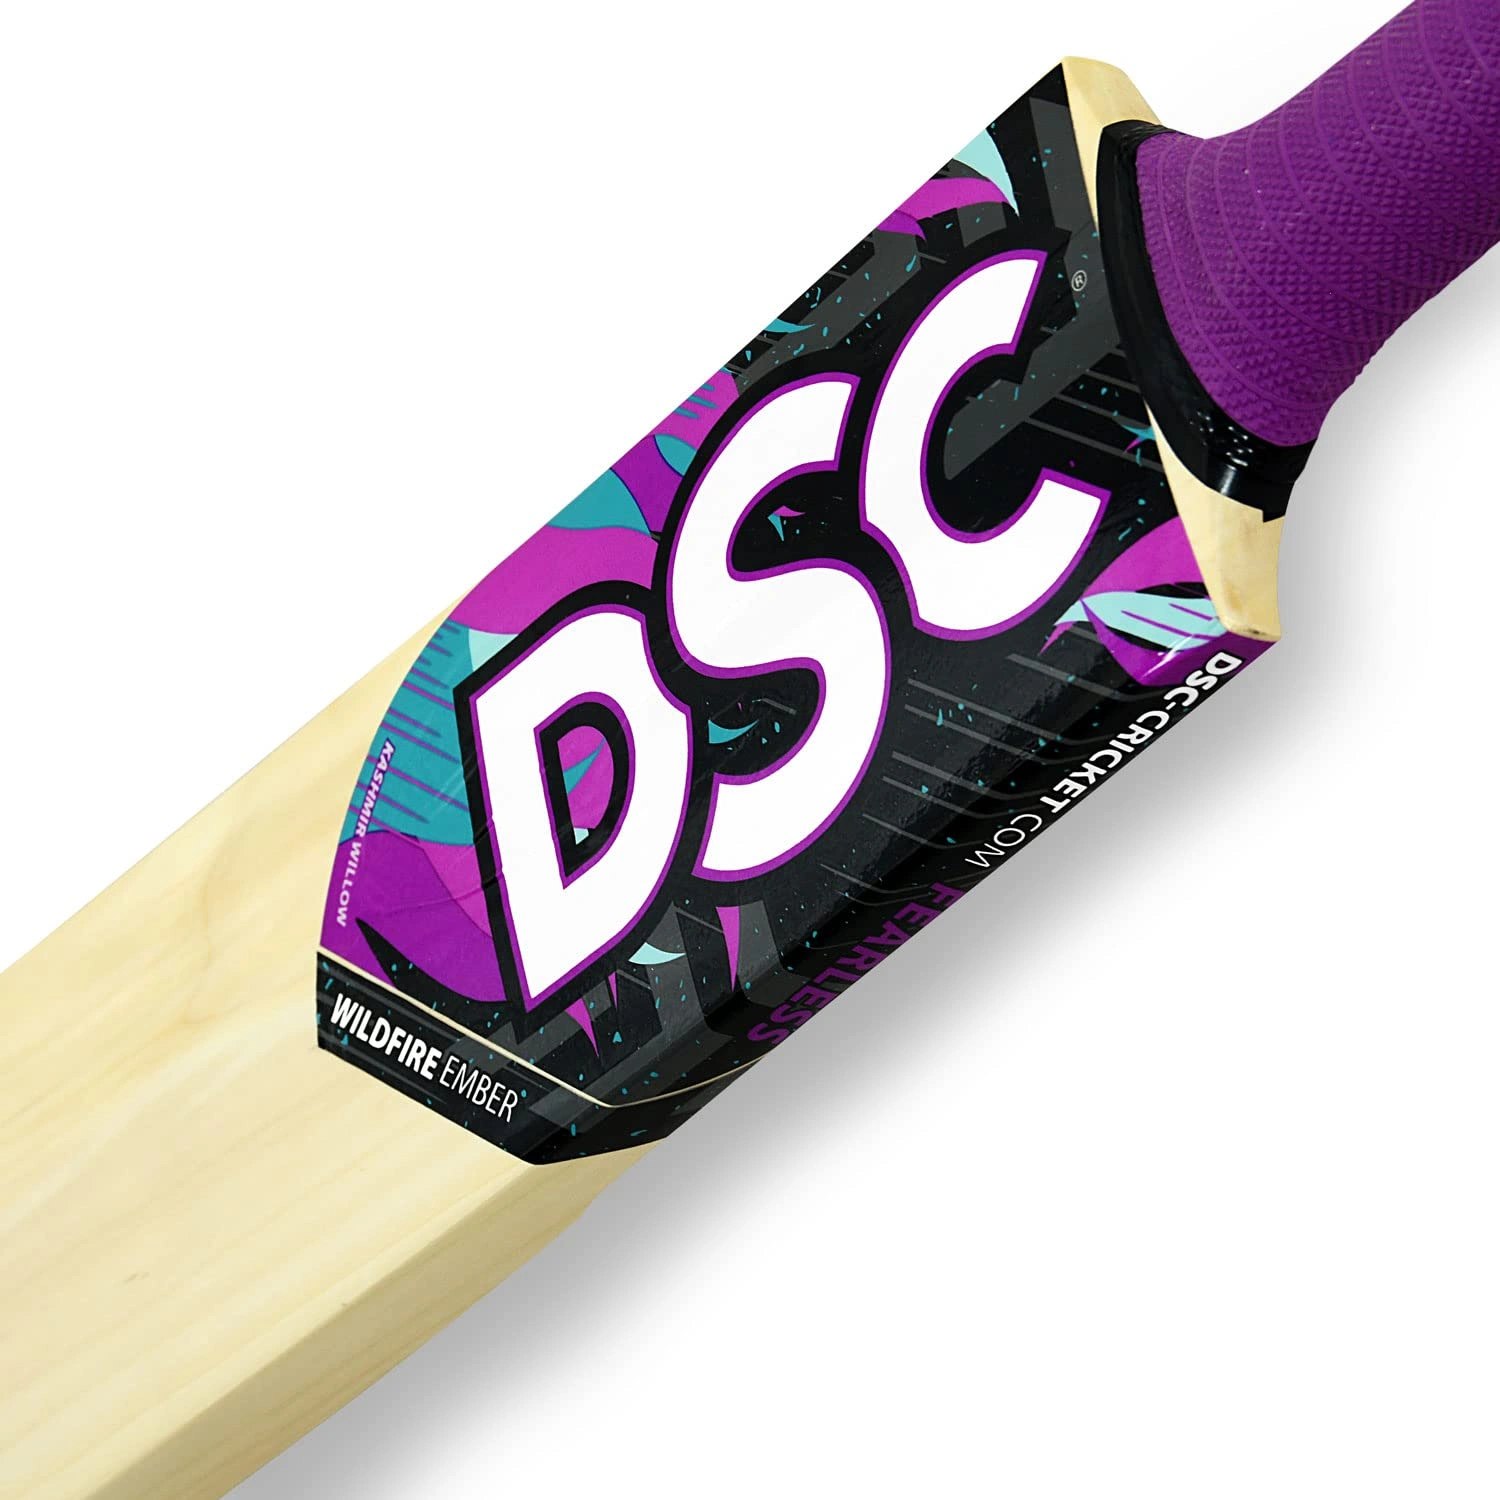 DSC Wildfire Ember Kashmir Willow Cricket Bat: Affordable and High-Performing Cricket Bat for Tennis Ball Cricket-FS-4